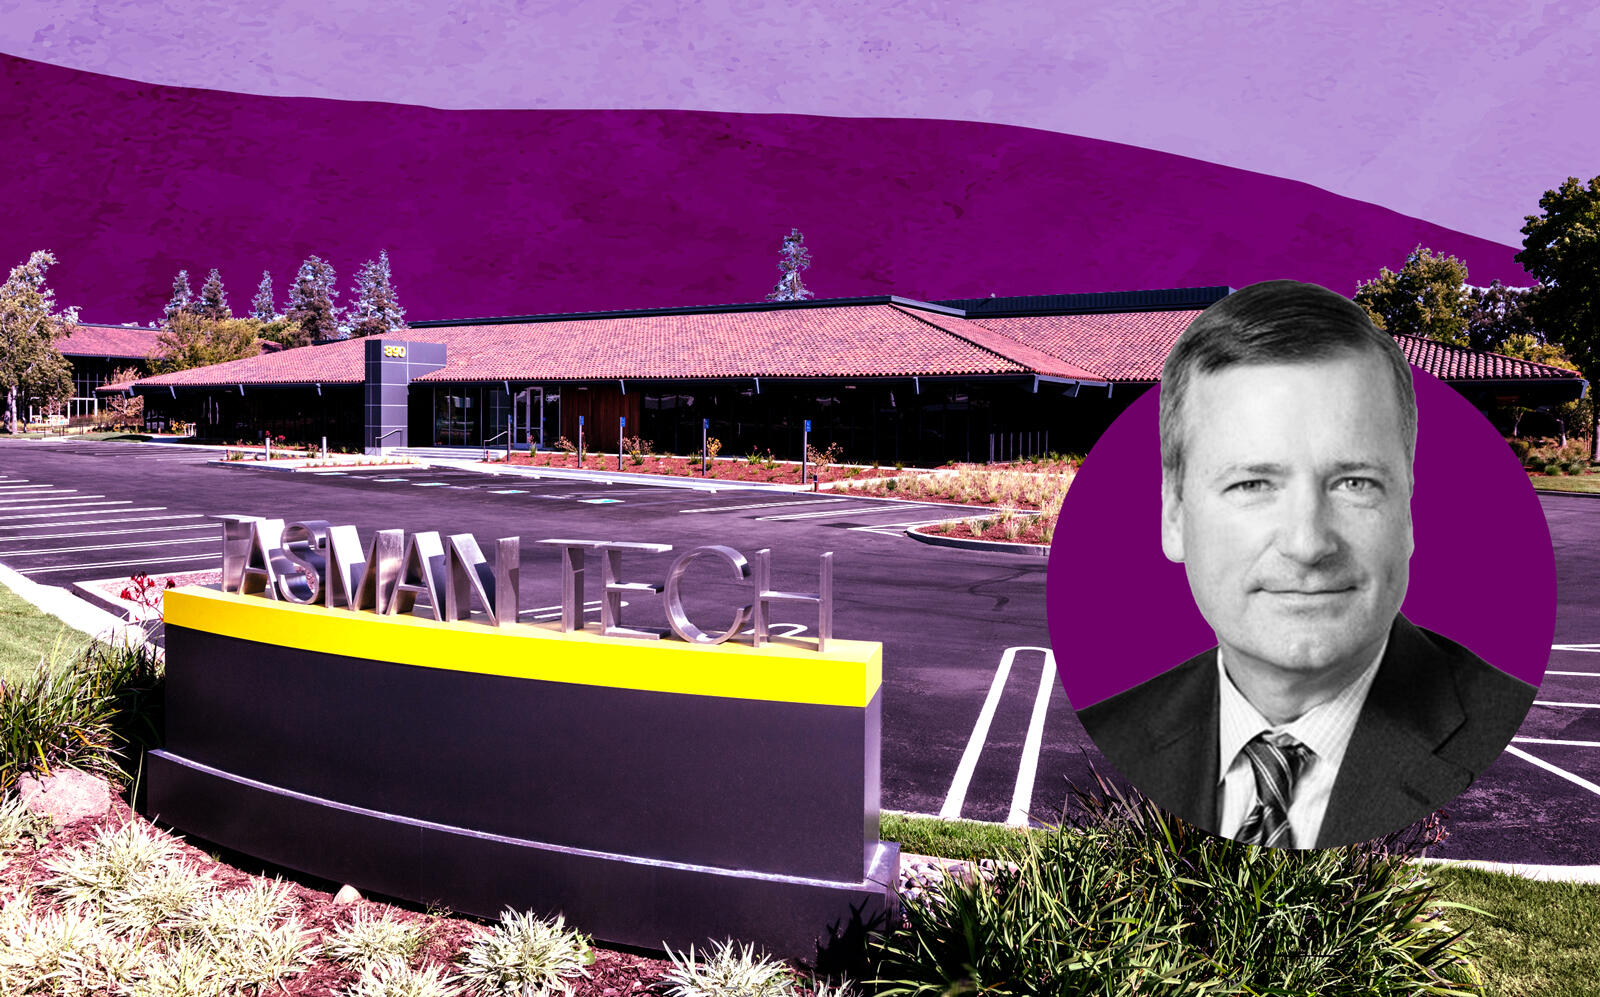 The Tasman Tech campus in Milpitas and Washington Holdings CEO Craig Wrench (CBRE, LinkedIn)